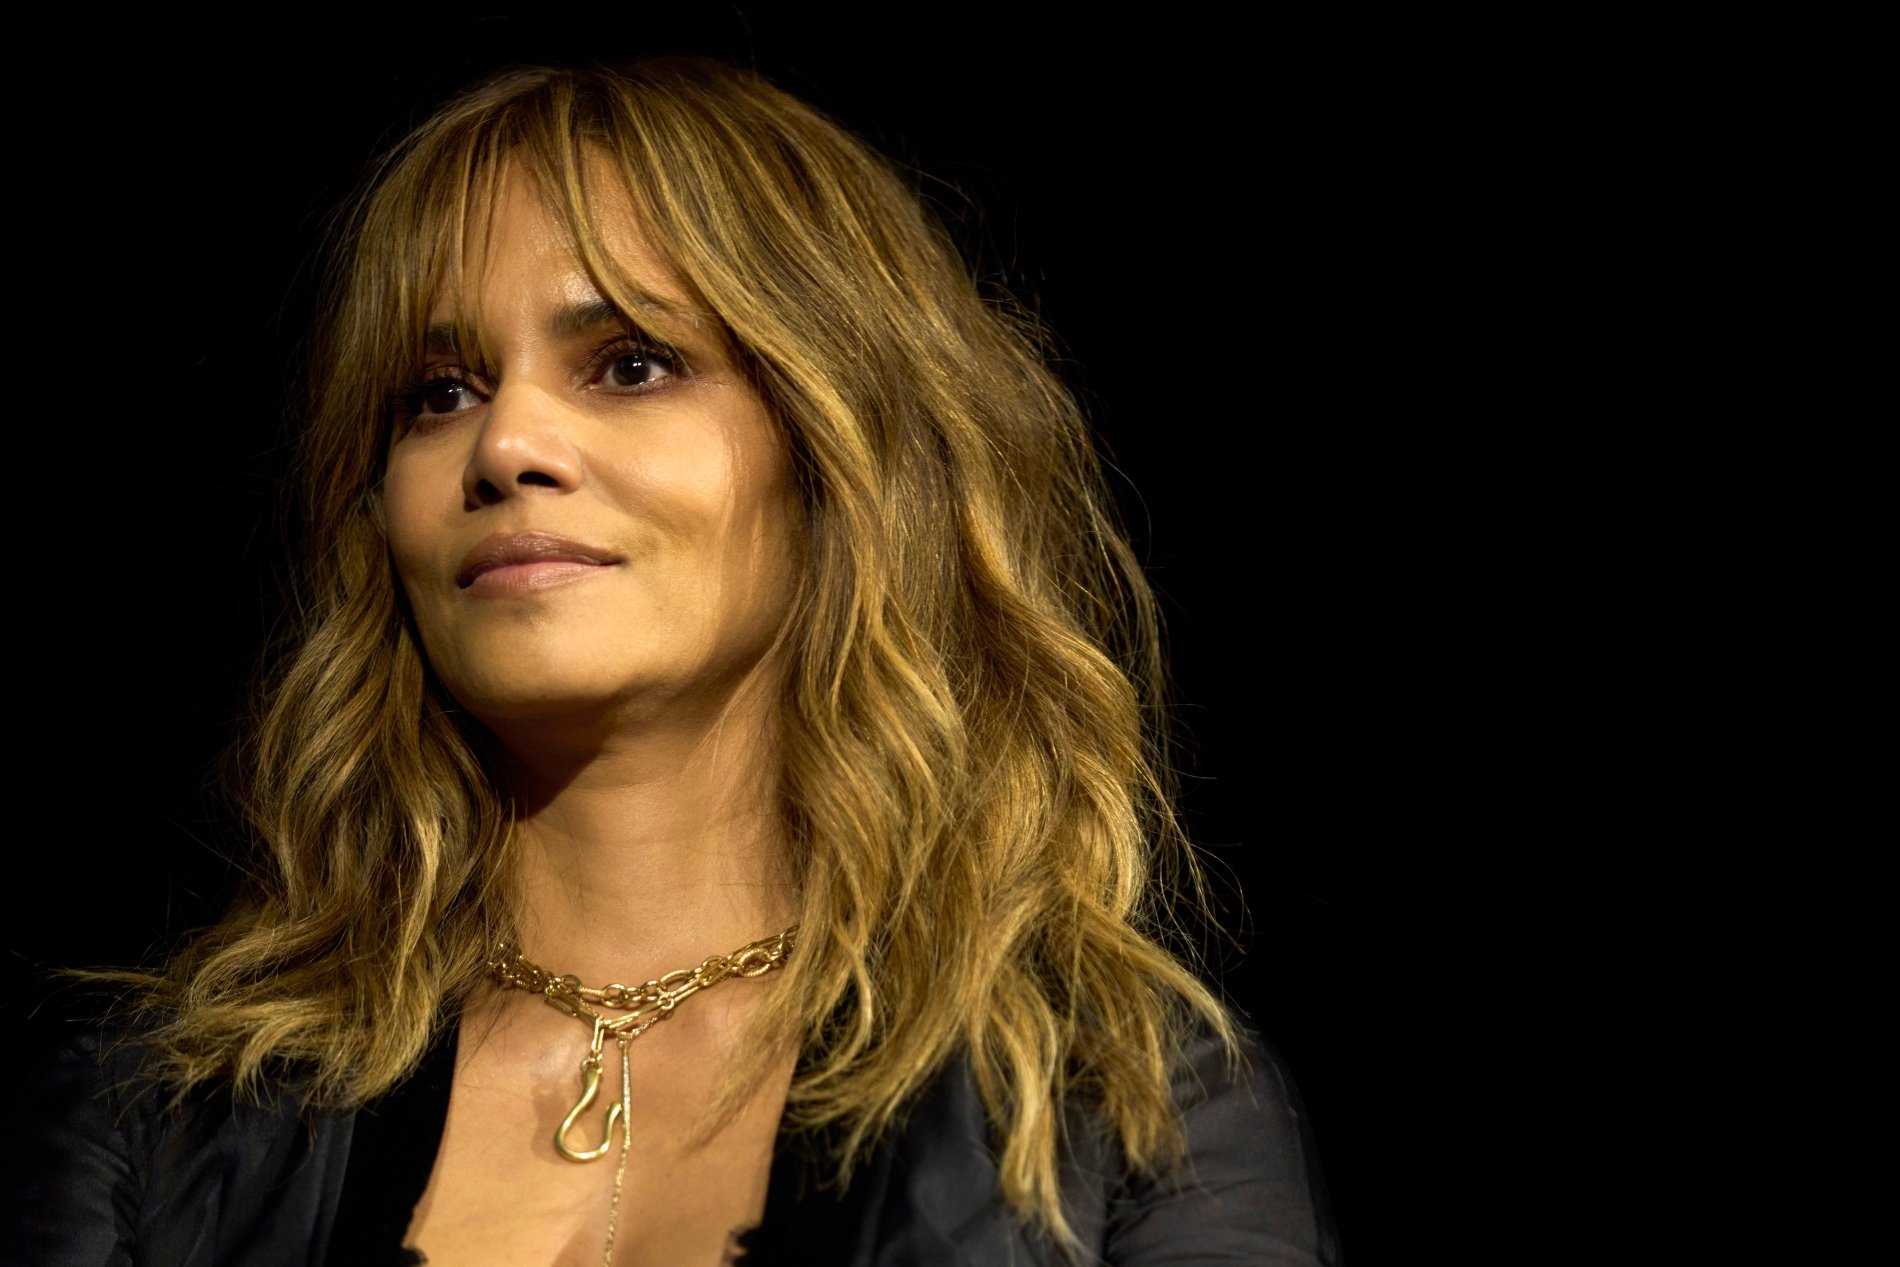 ‘Bruised’ Star Halle Berry Says Her Gymnastics Training Inspired Her Action Roles